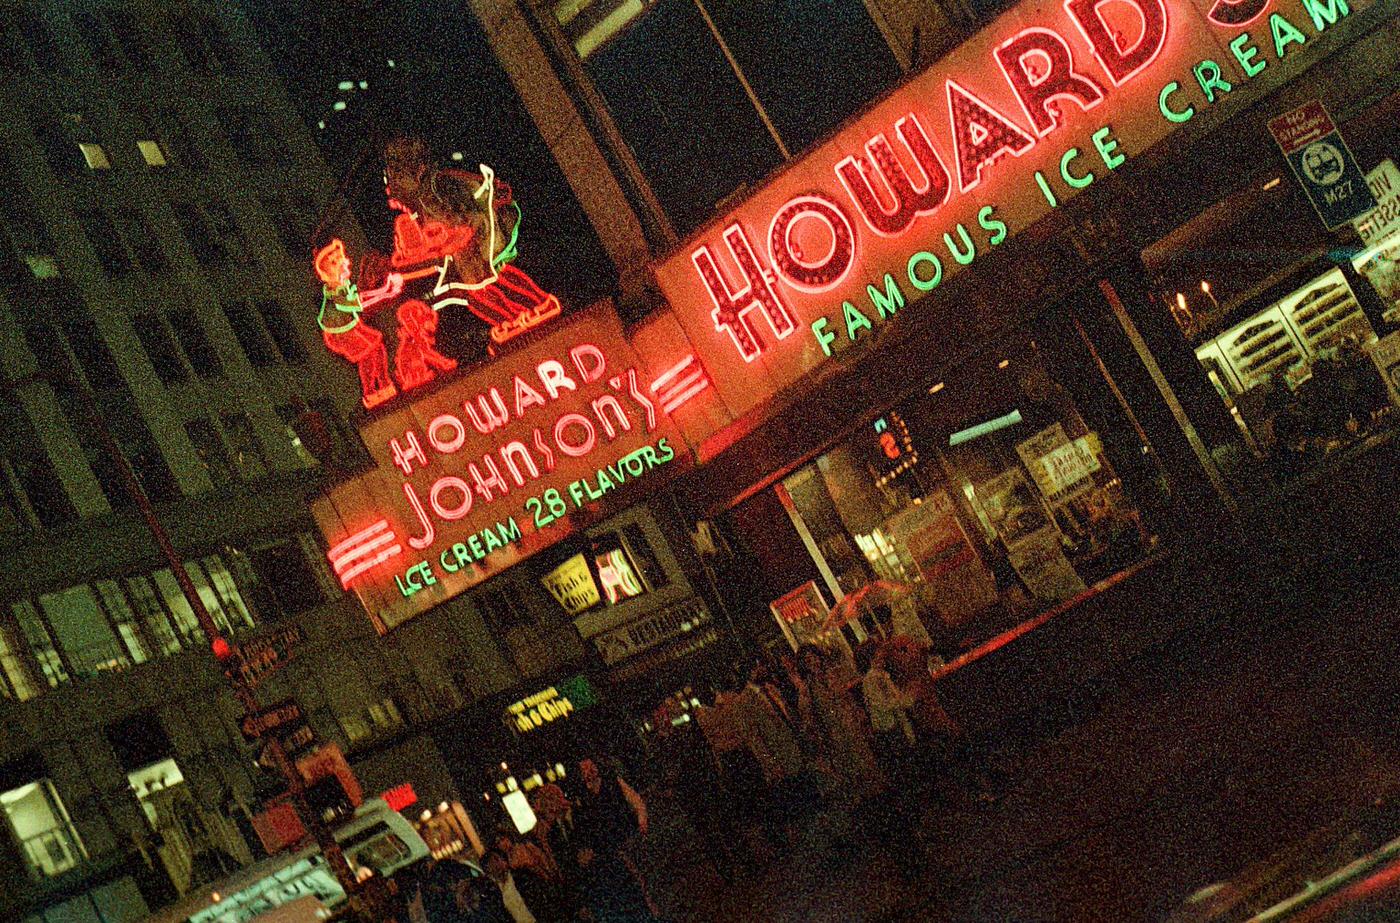 People In Front Of The Howard Johnson'S Restaurant In Times Square, Manhattan, 1984.